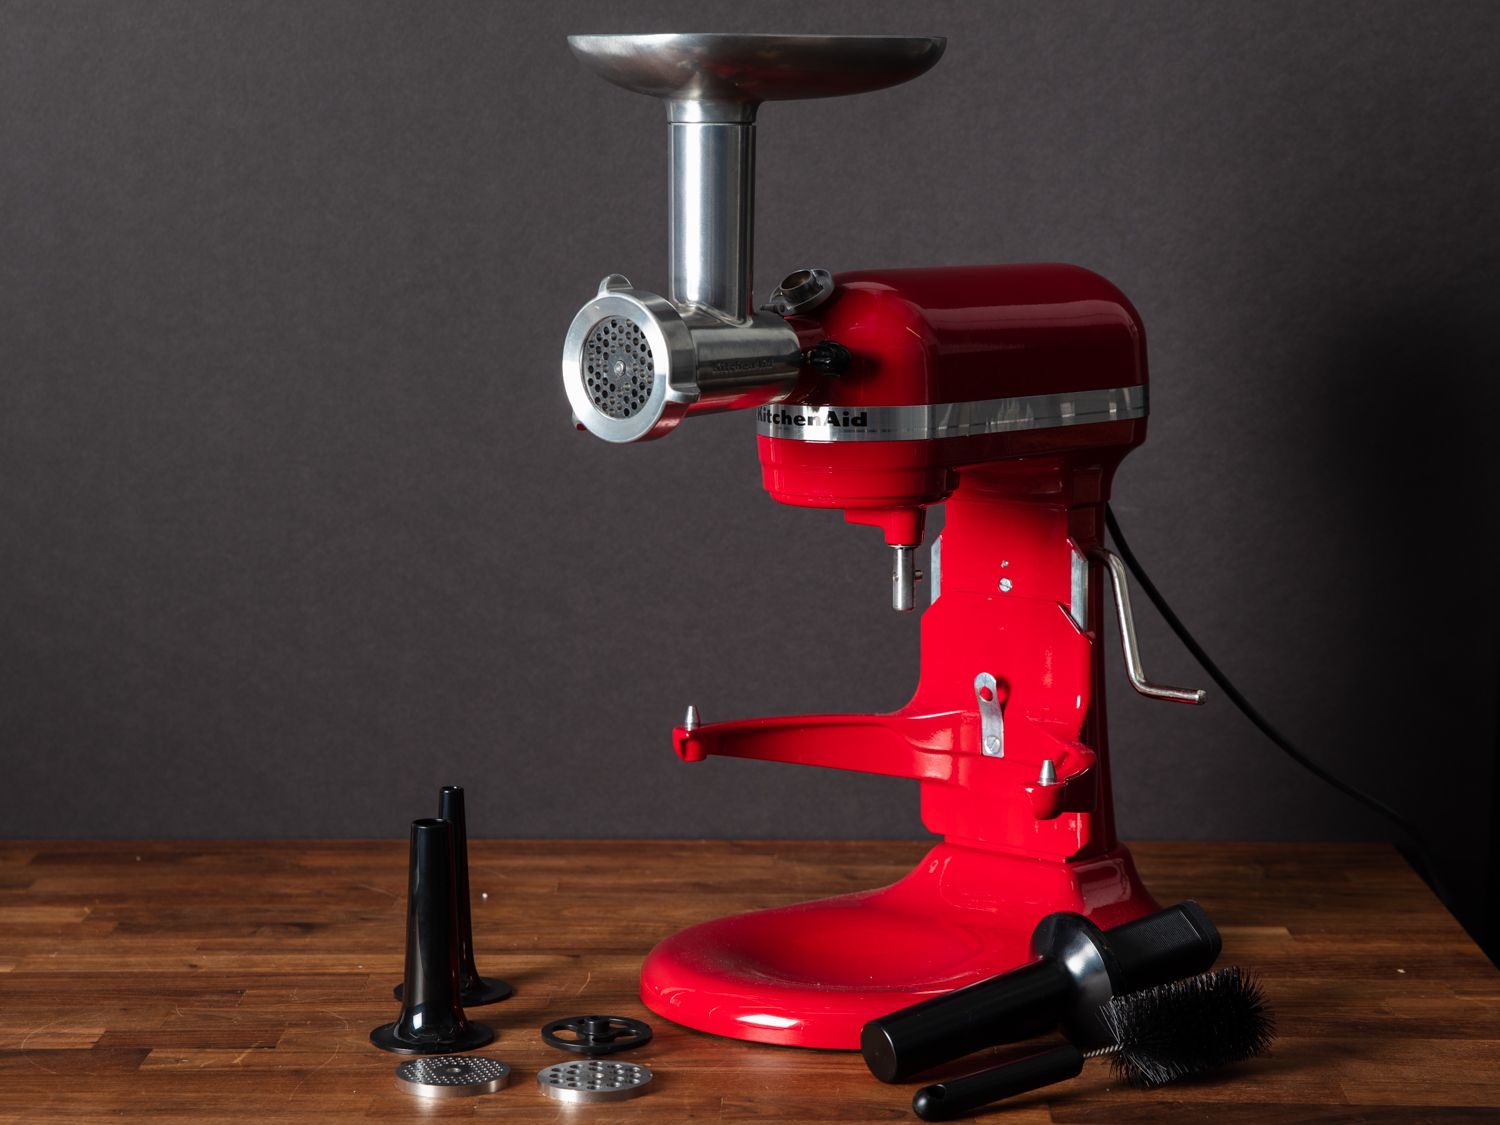 The KitchenAid stand mixer meat grinder attachment